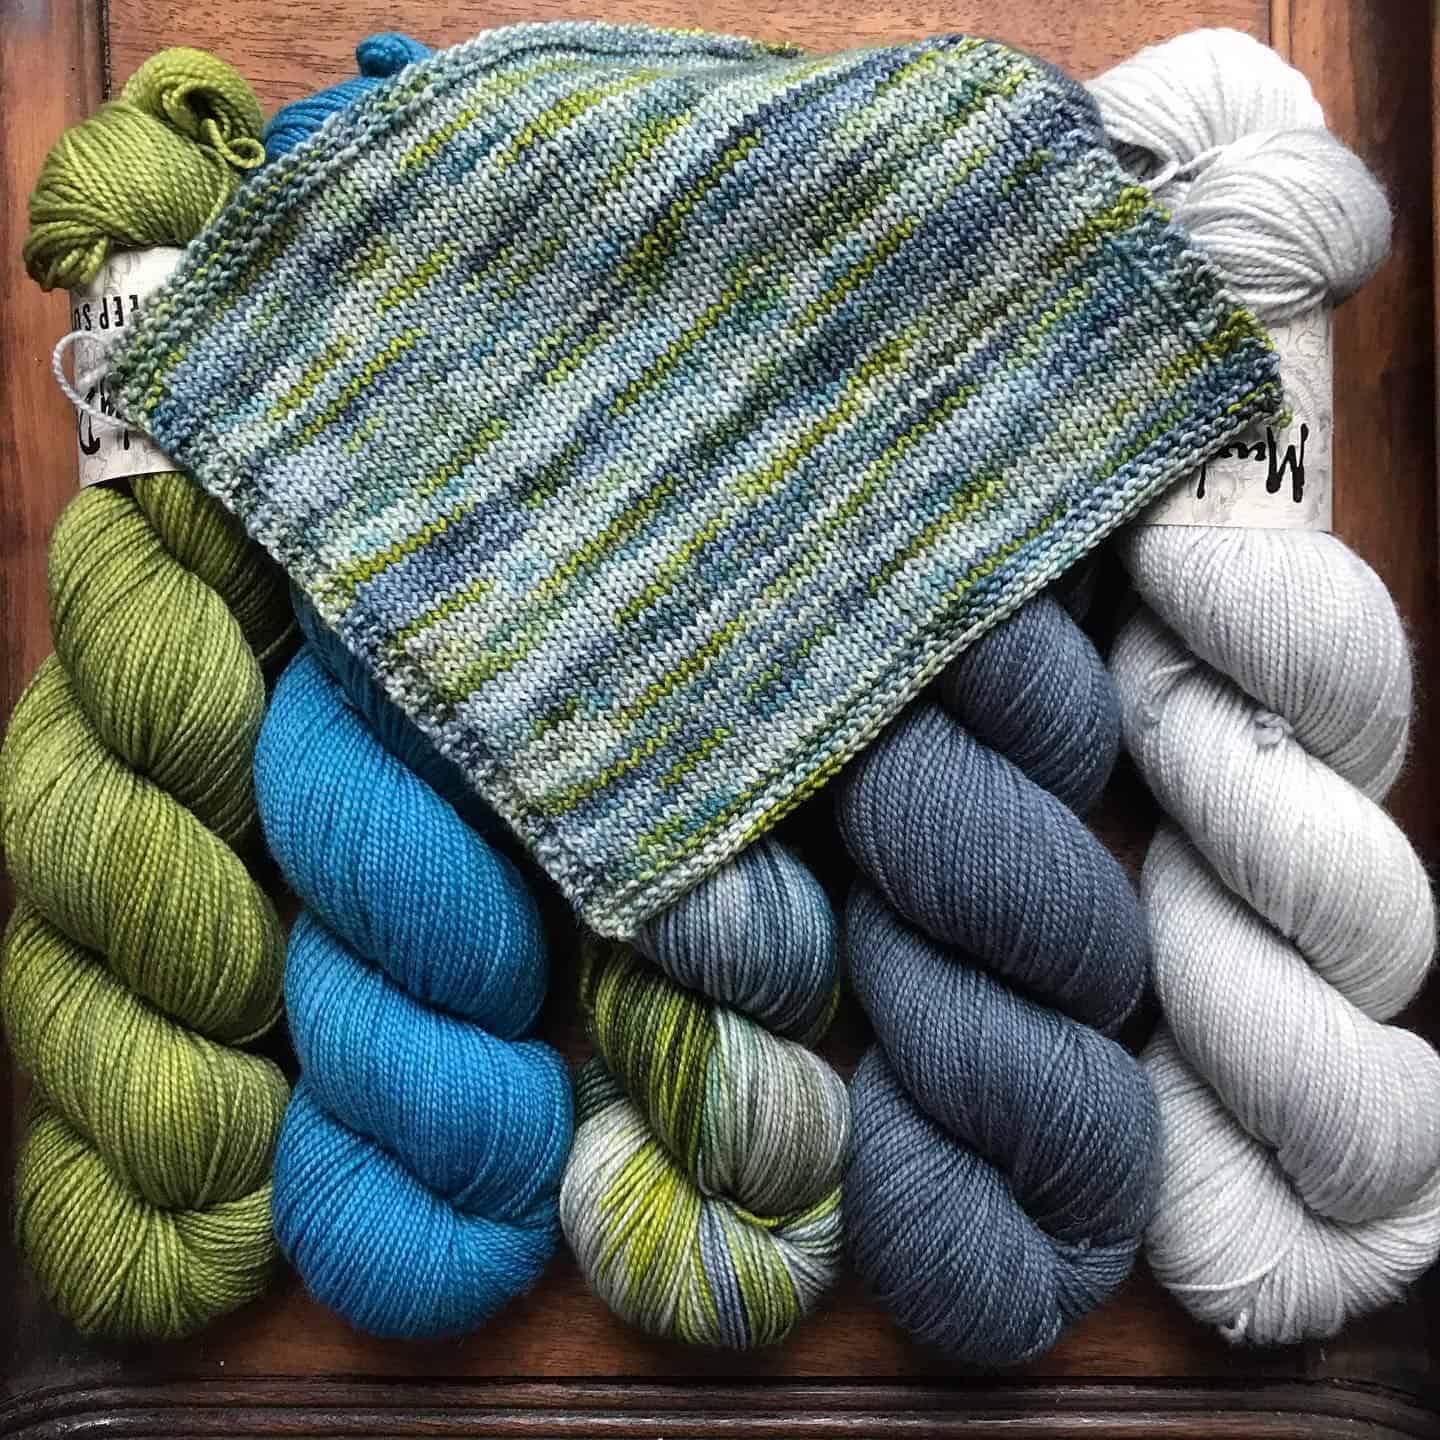 A blue, green and gray knitting swatch over skeins of yarn.